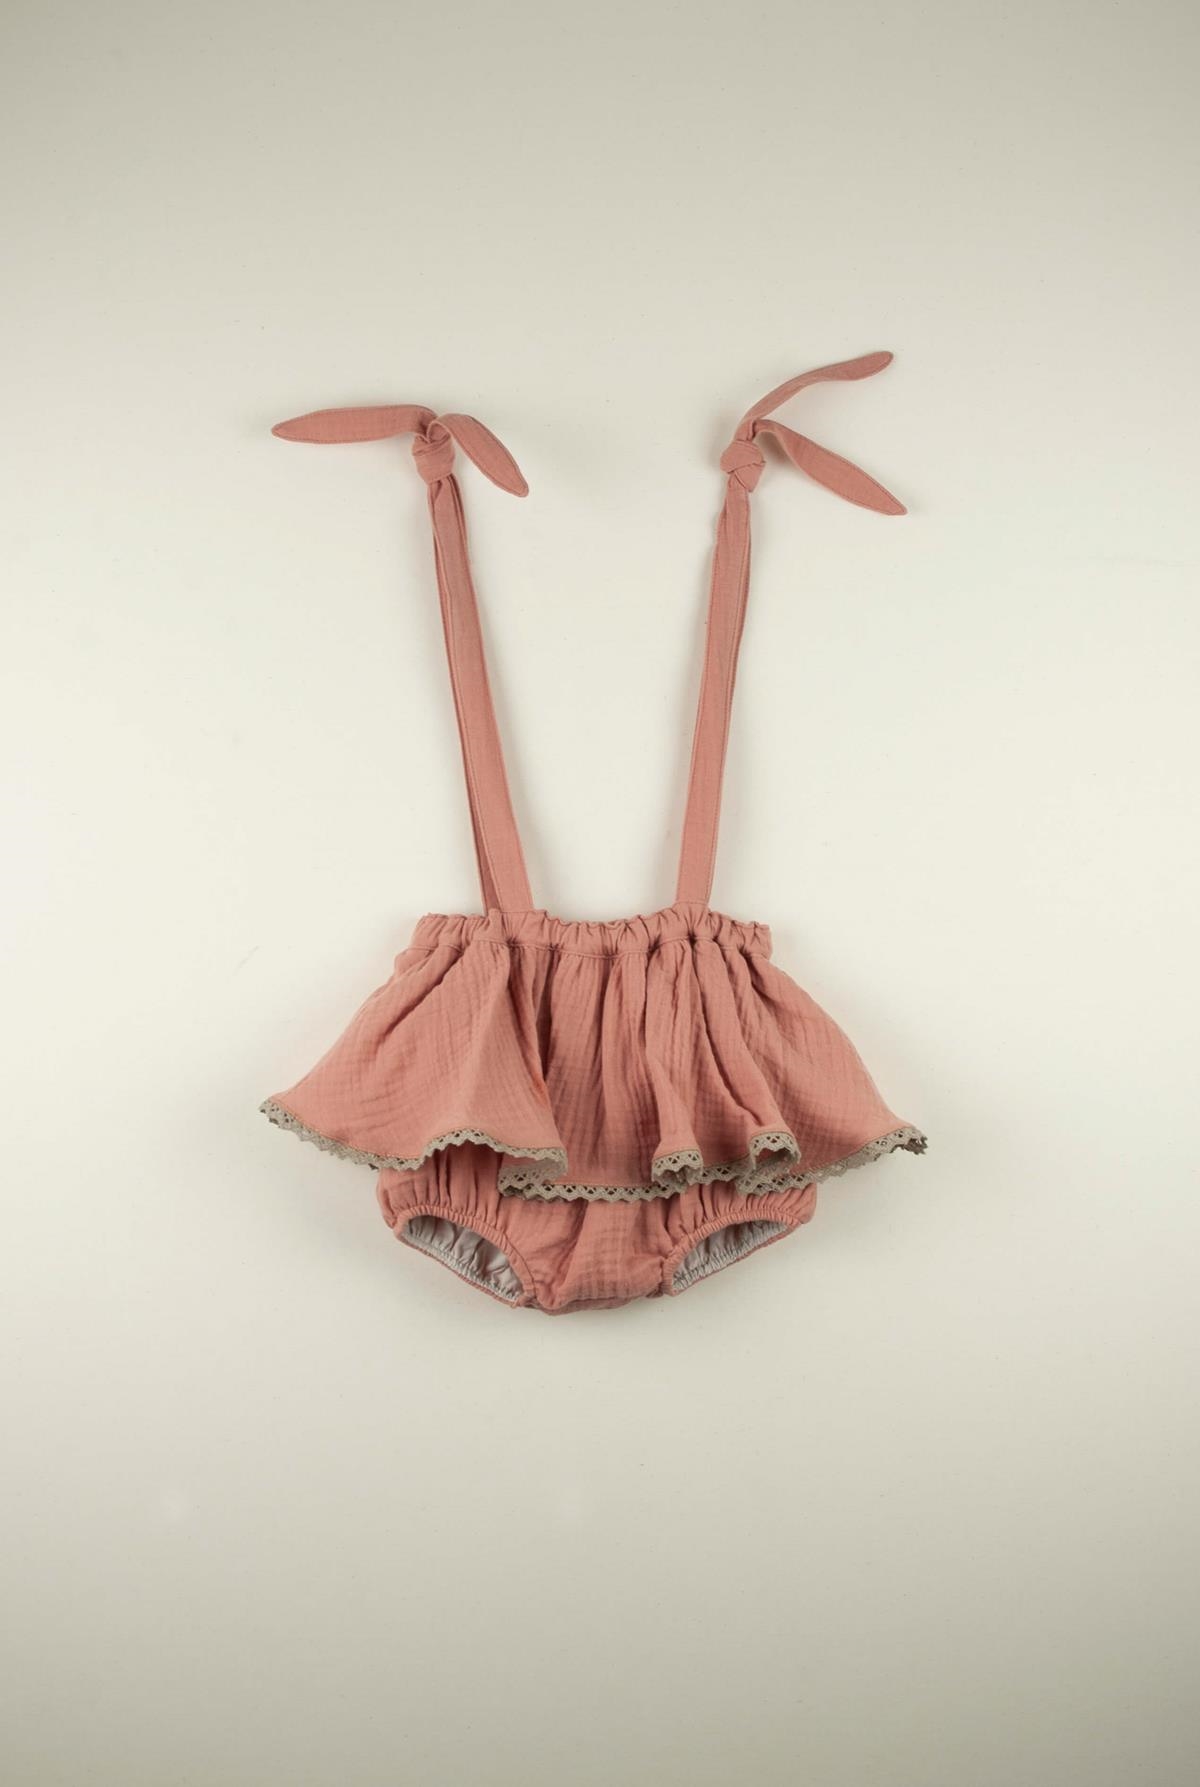 Mod.4.2 Skirted pink romper suit | AW21.22 Mod.4.2 Skirted pink romper suit | 1